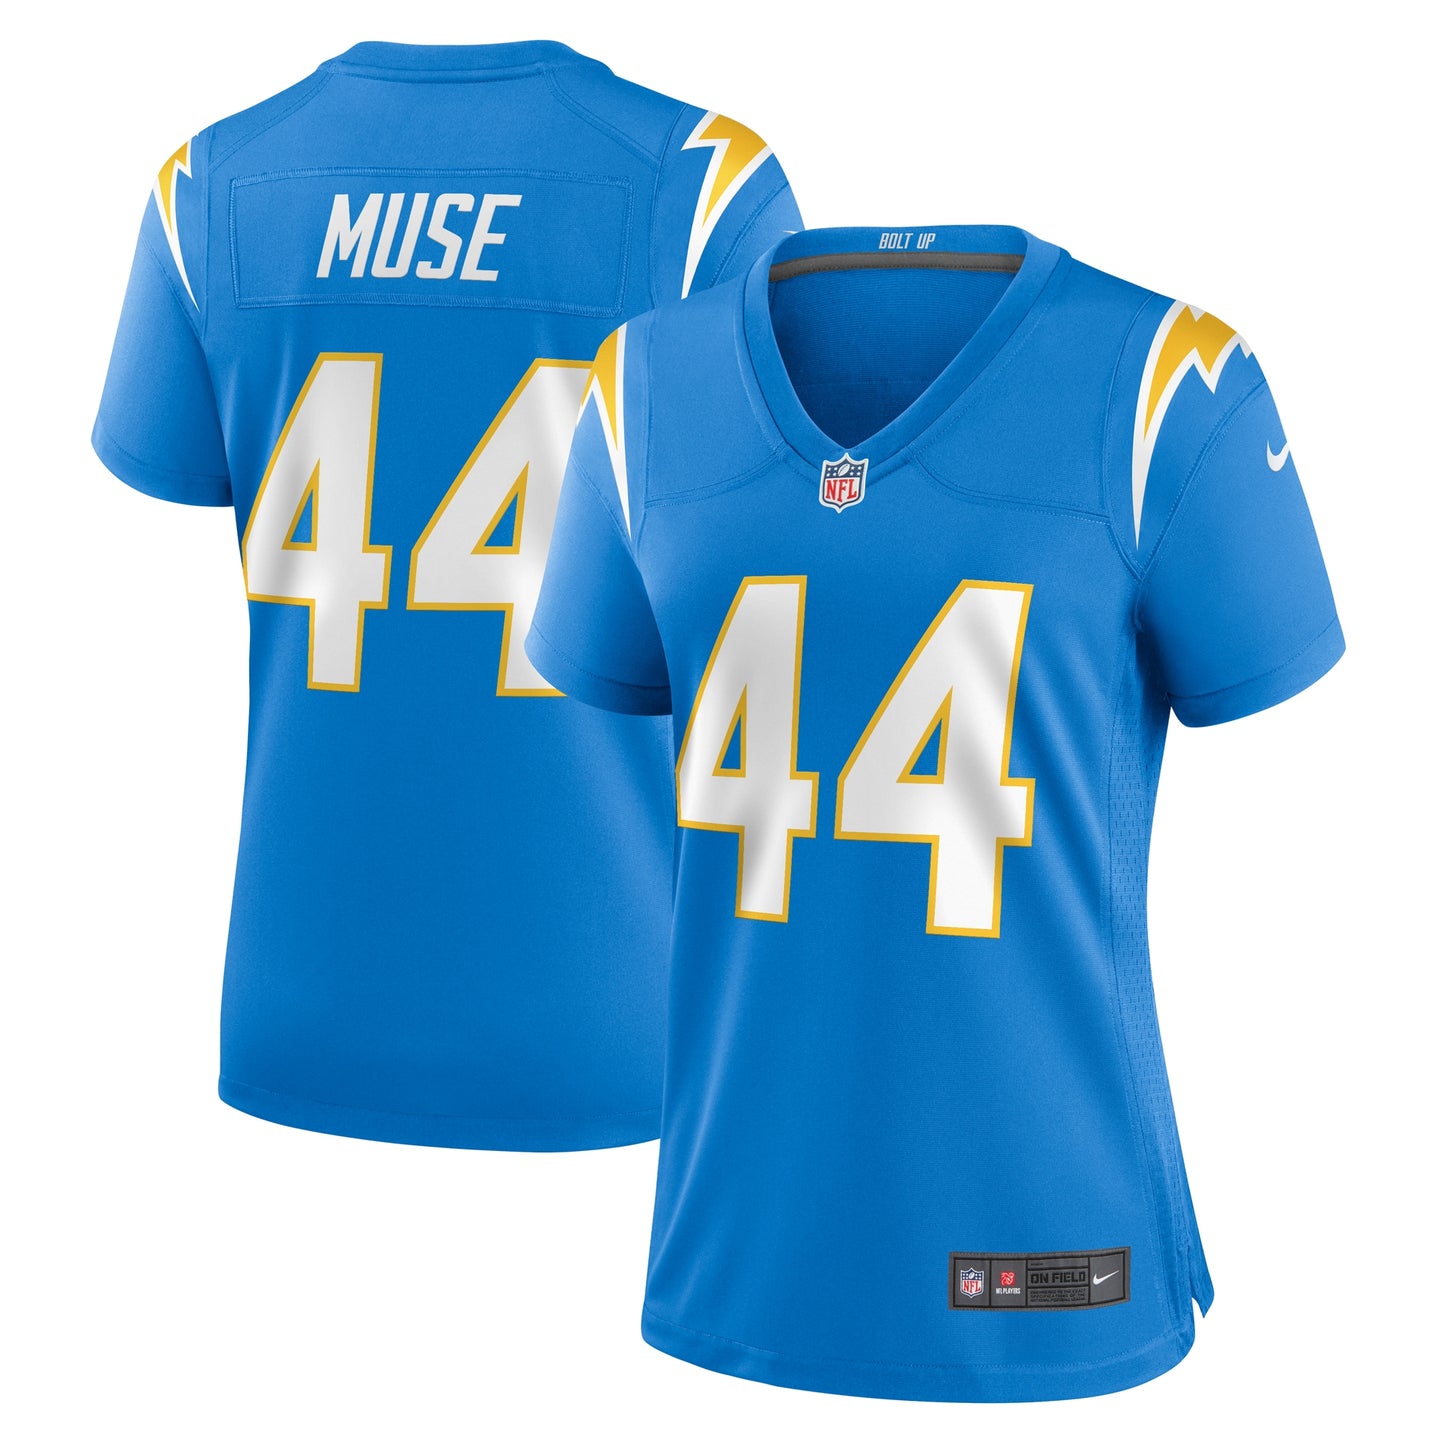 Tanner Muse Los Angeles Chargers Nike Women's Team Game Jersey - Powder Blue